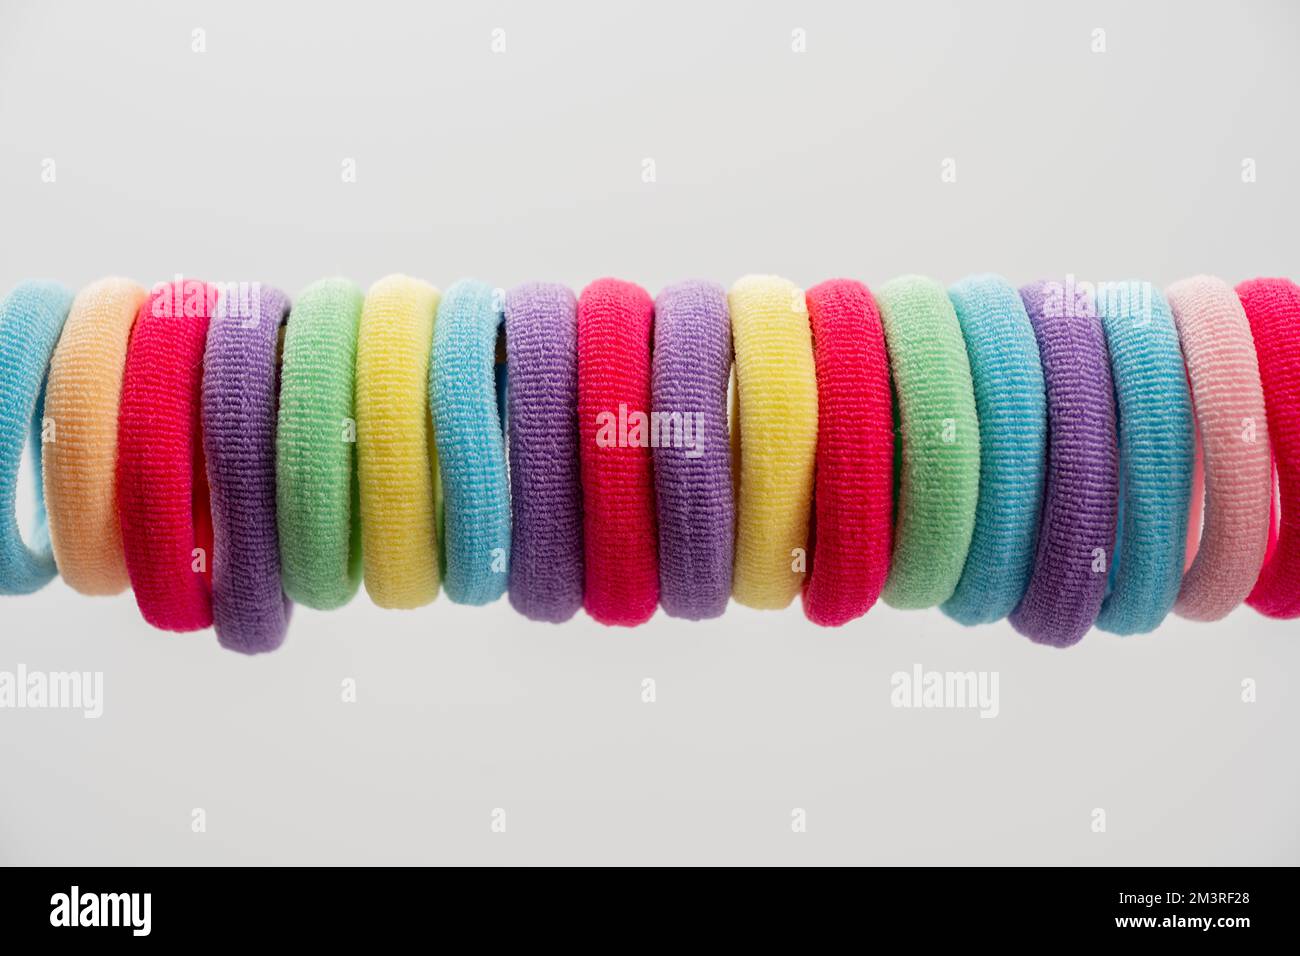 string of brightly colored elastic round hair bands isolated on a white background Stock Photo